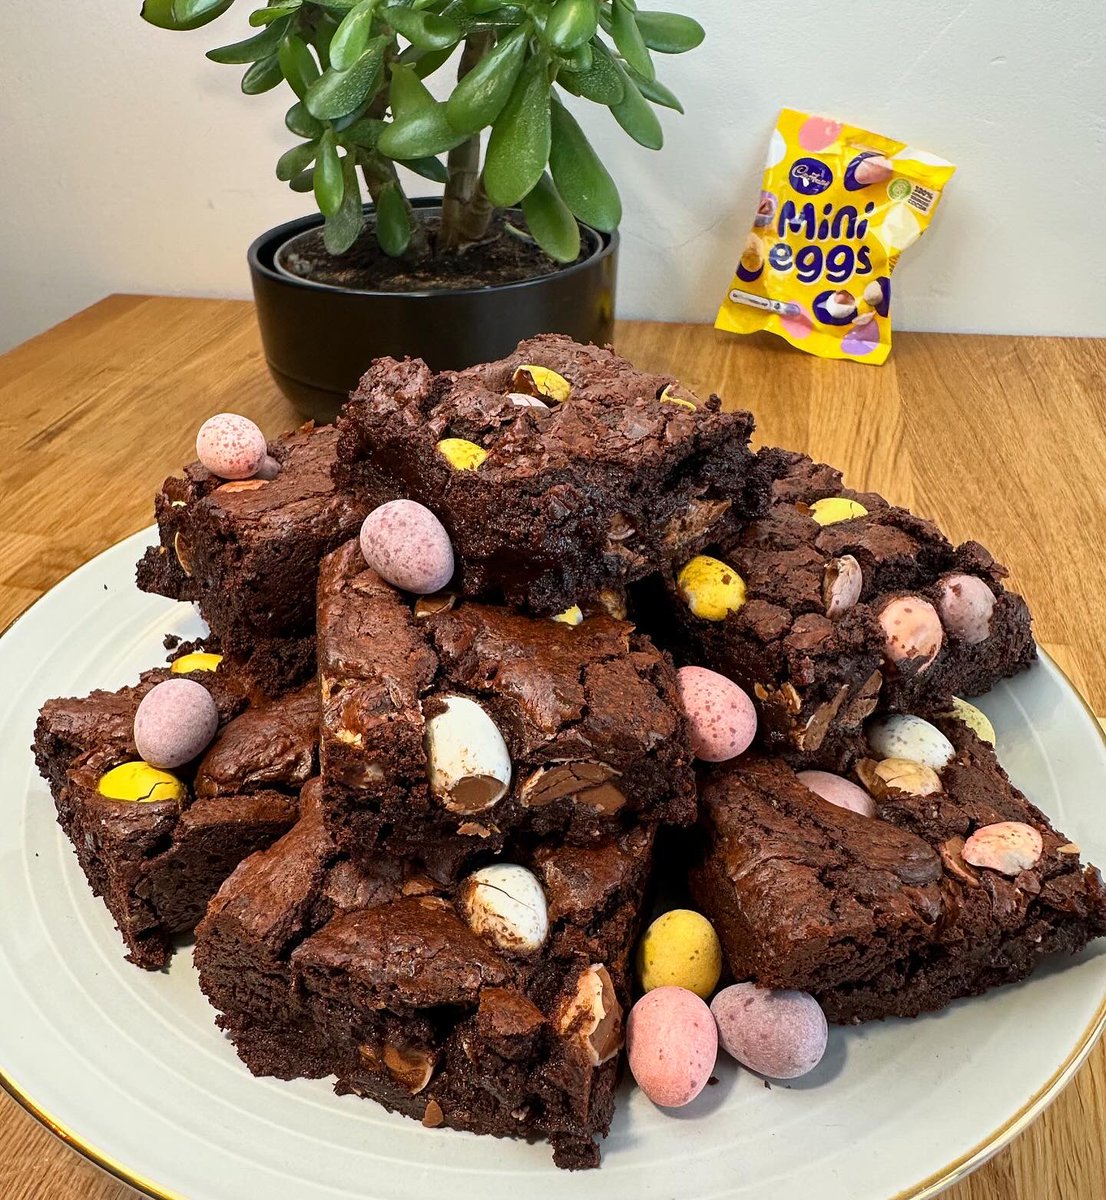 Sharing the recipe for these Fudgy Mini Egg Brownies soon, the baby made me do it 🙈🤰 #easter #recipetreat #minieggs #brownies #easyrecipes #chocolatebrownies #treat #treats #chocolate #foodporn